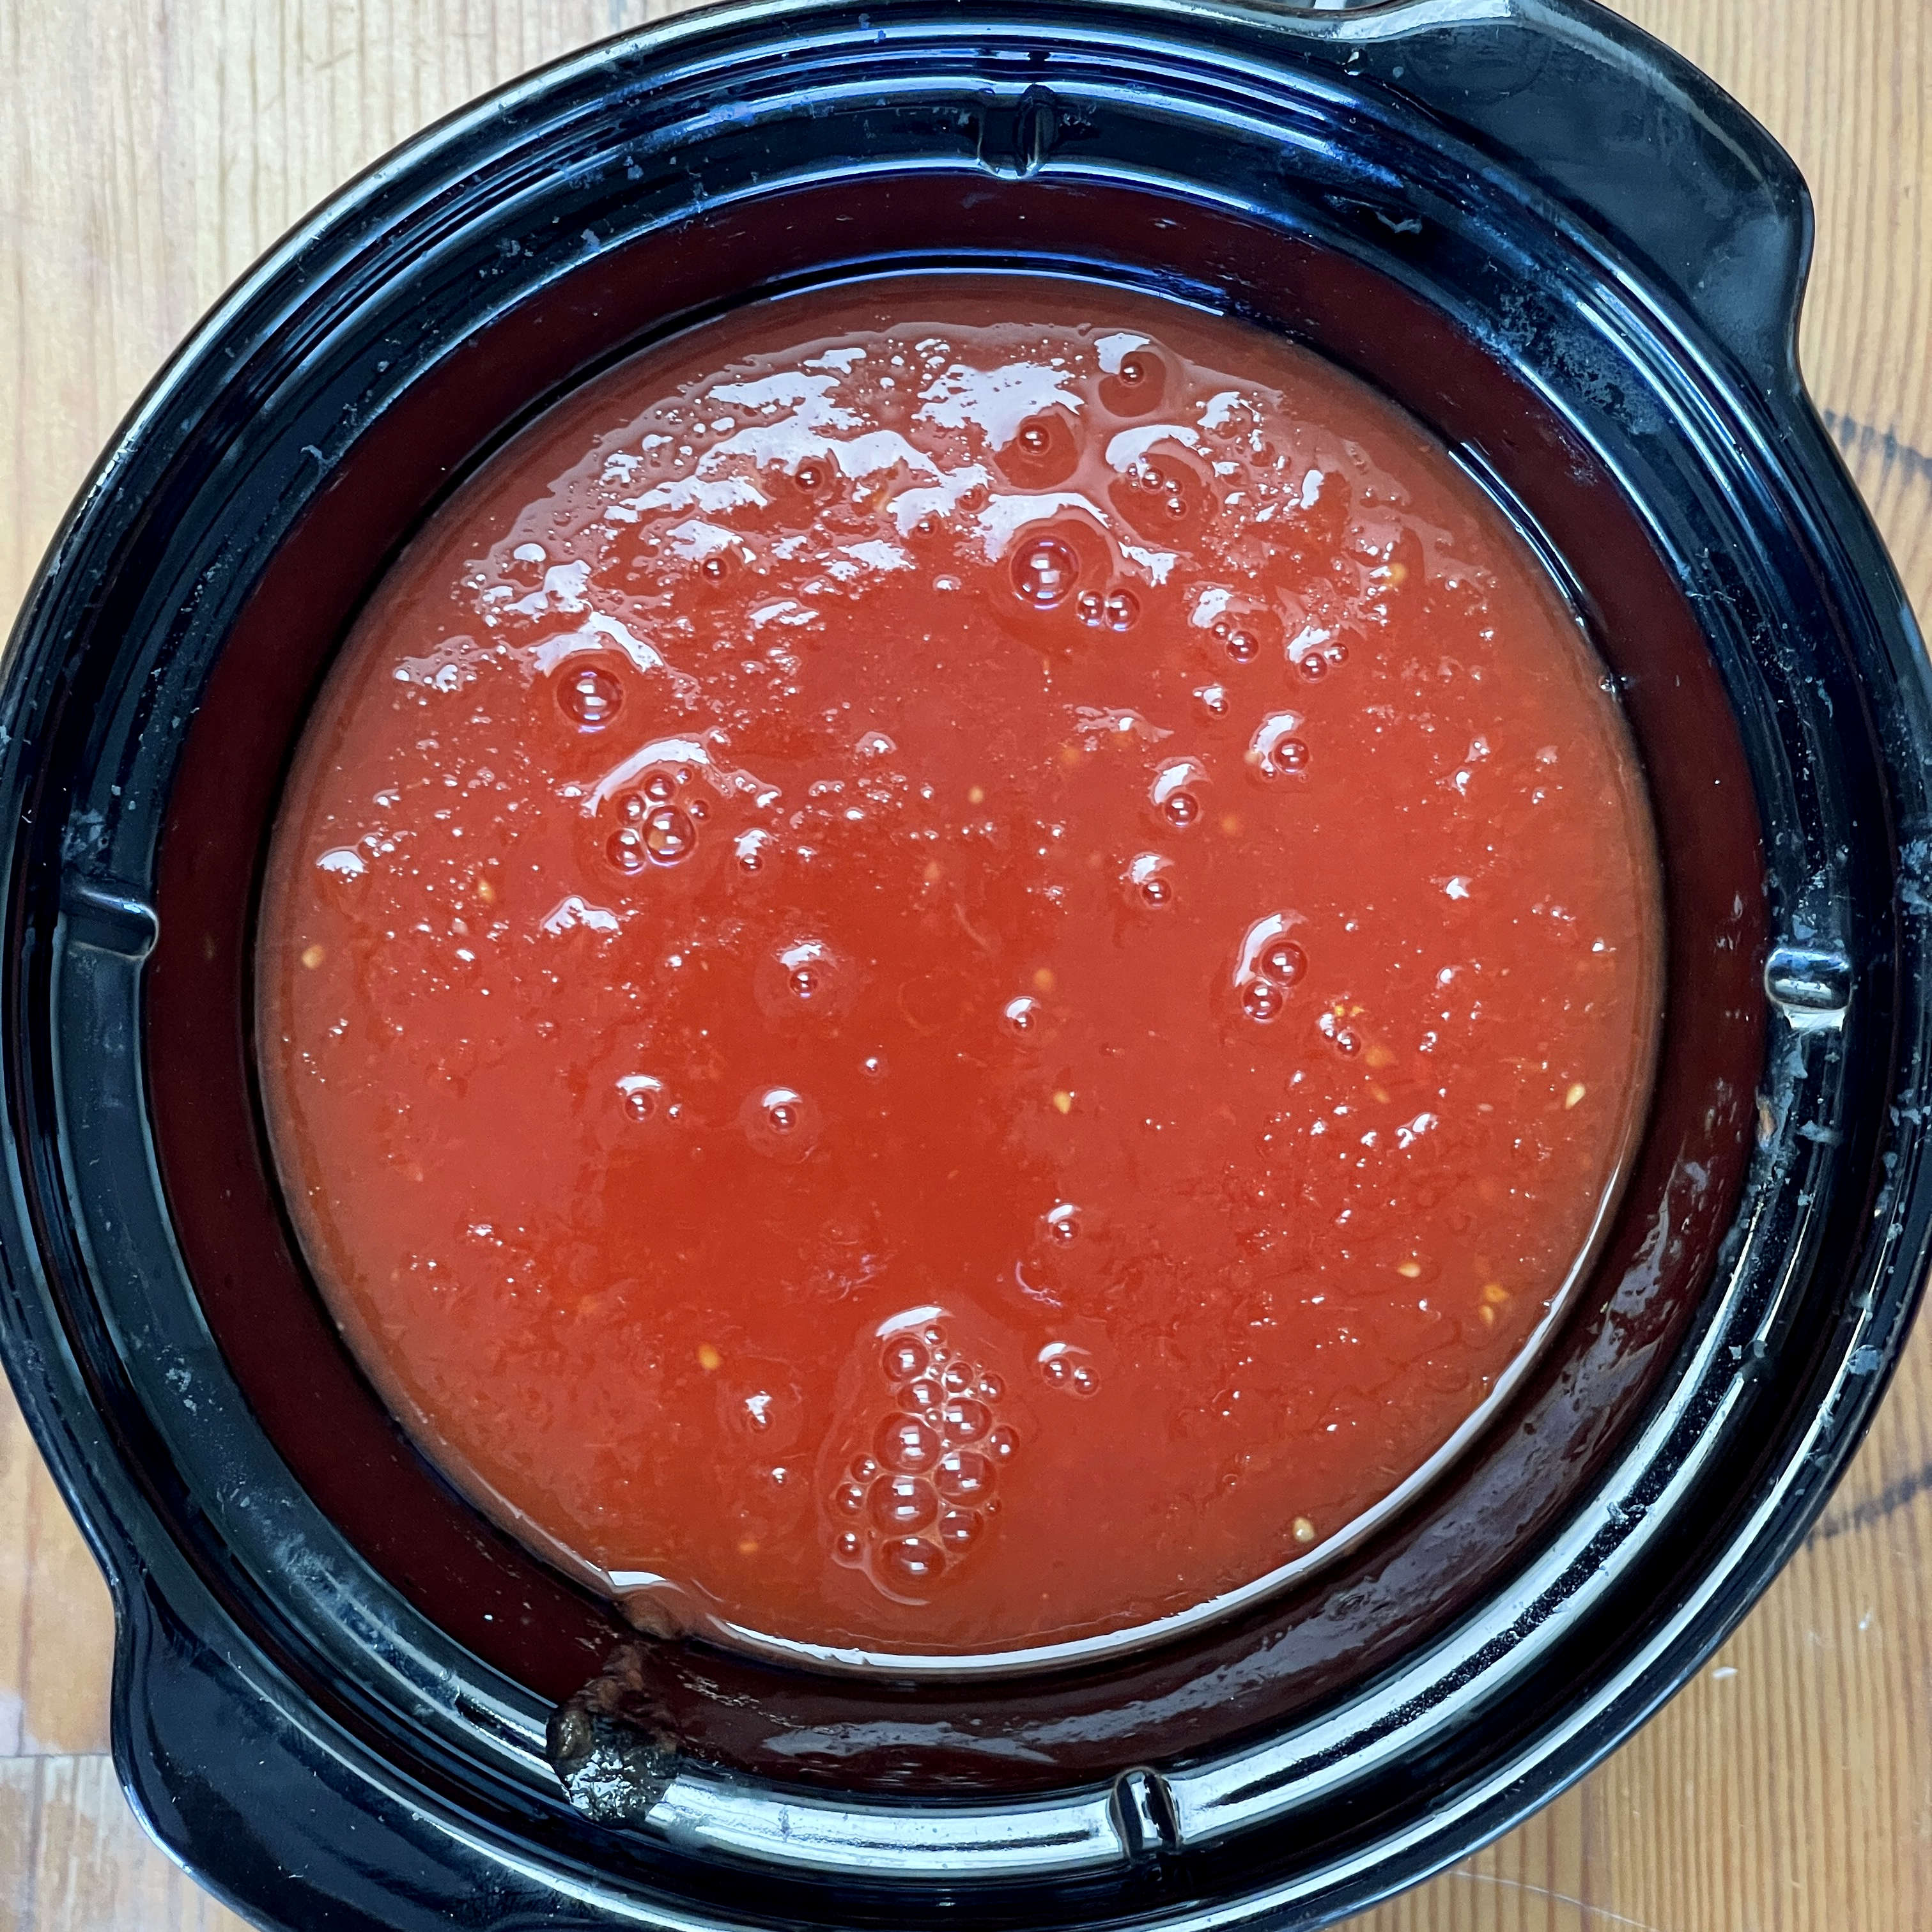 The black crock of a slow cooker is filled with puréed tomatoes to cook down into tomato sauce